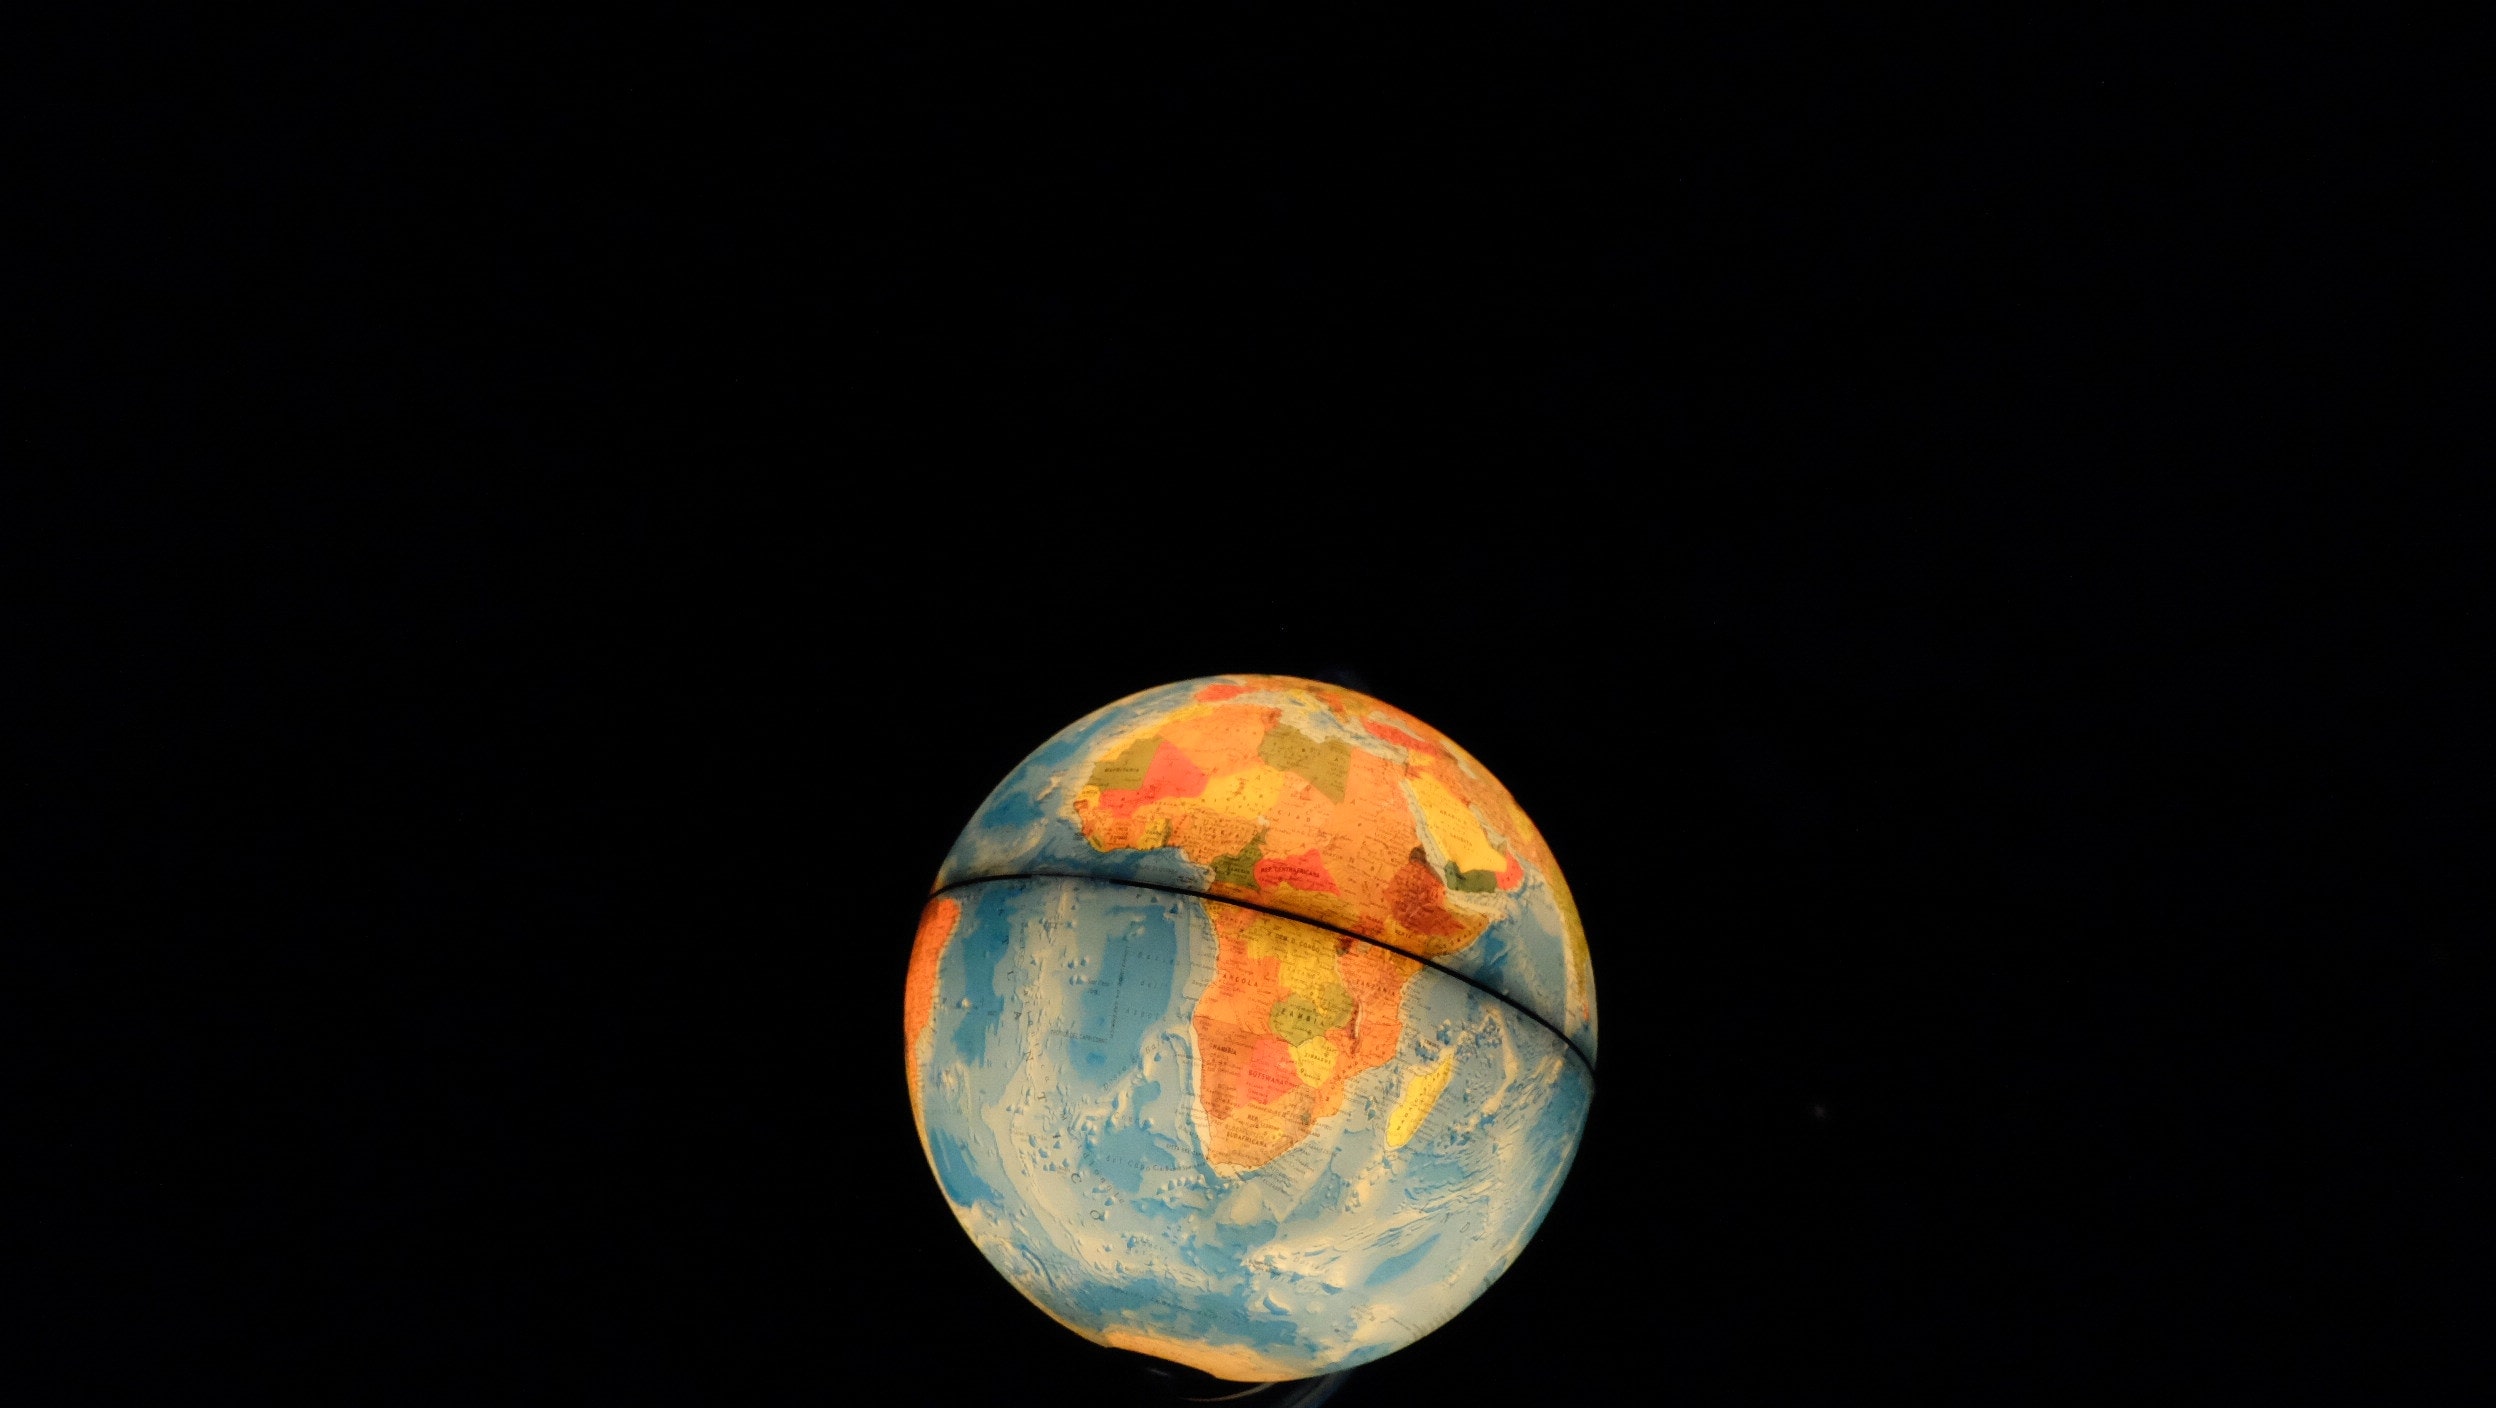 Lit up globe with a black background